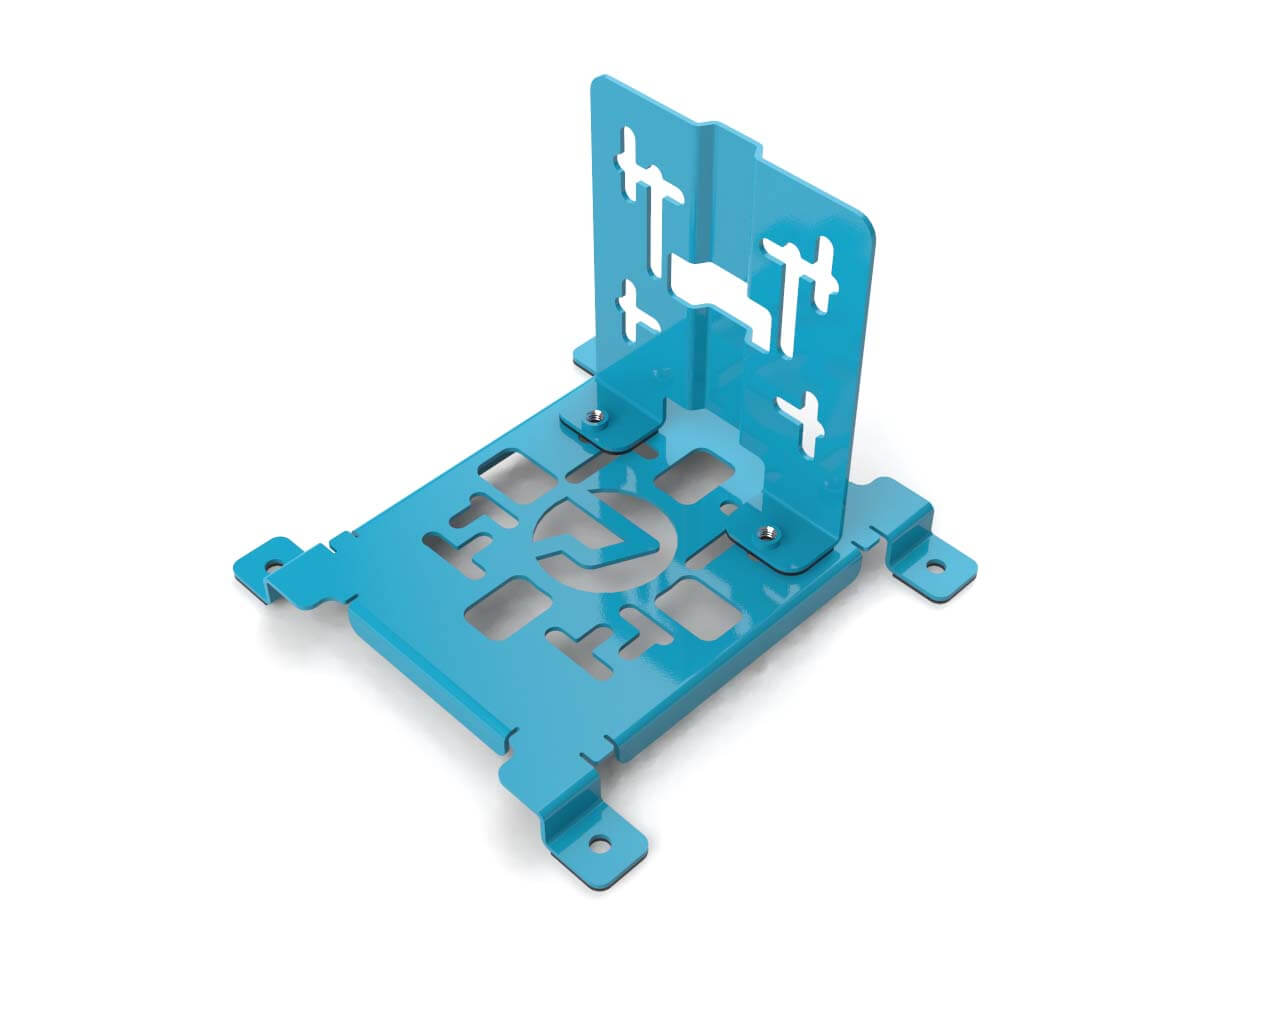 PrimoChill SX Universal Spider Mount Bracket Kit - 120mm Series - PrimoChill - KEEPING IT COOL Sky Blue